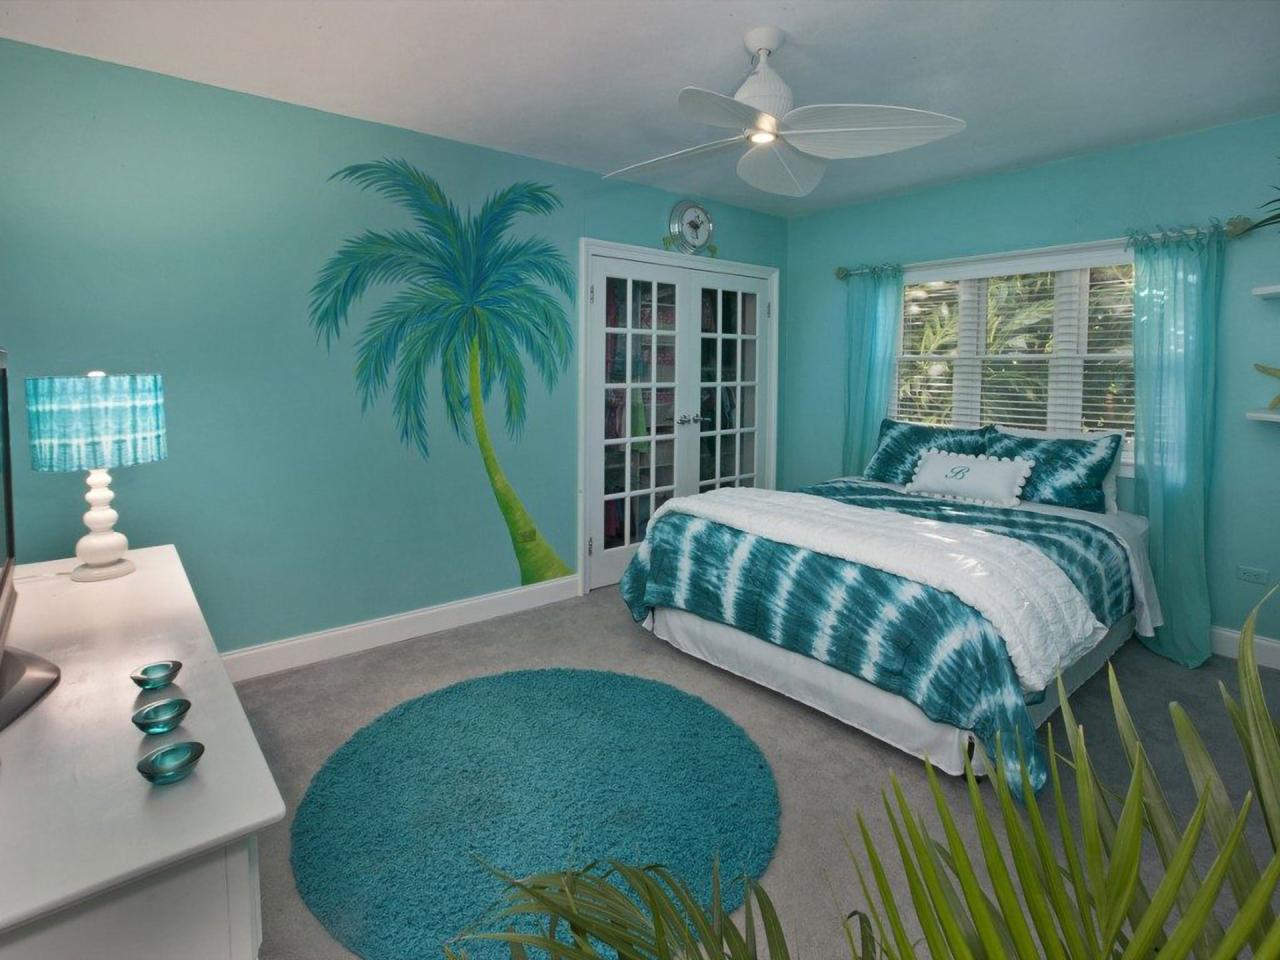 Coastal Comfort: Relaxed and Inviting Beachy Bedroom Style